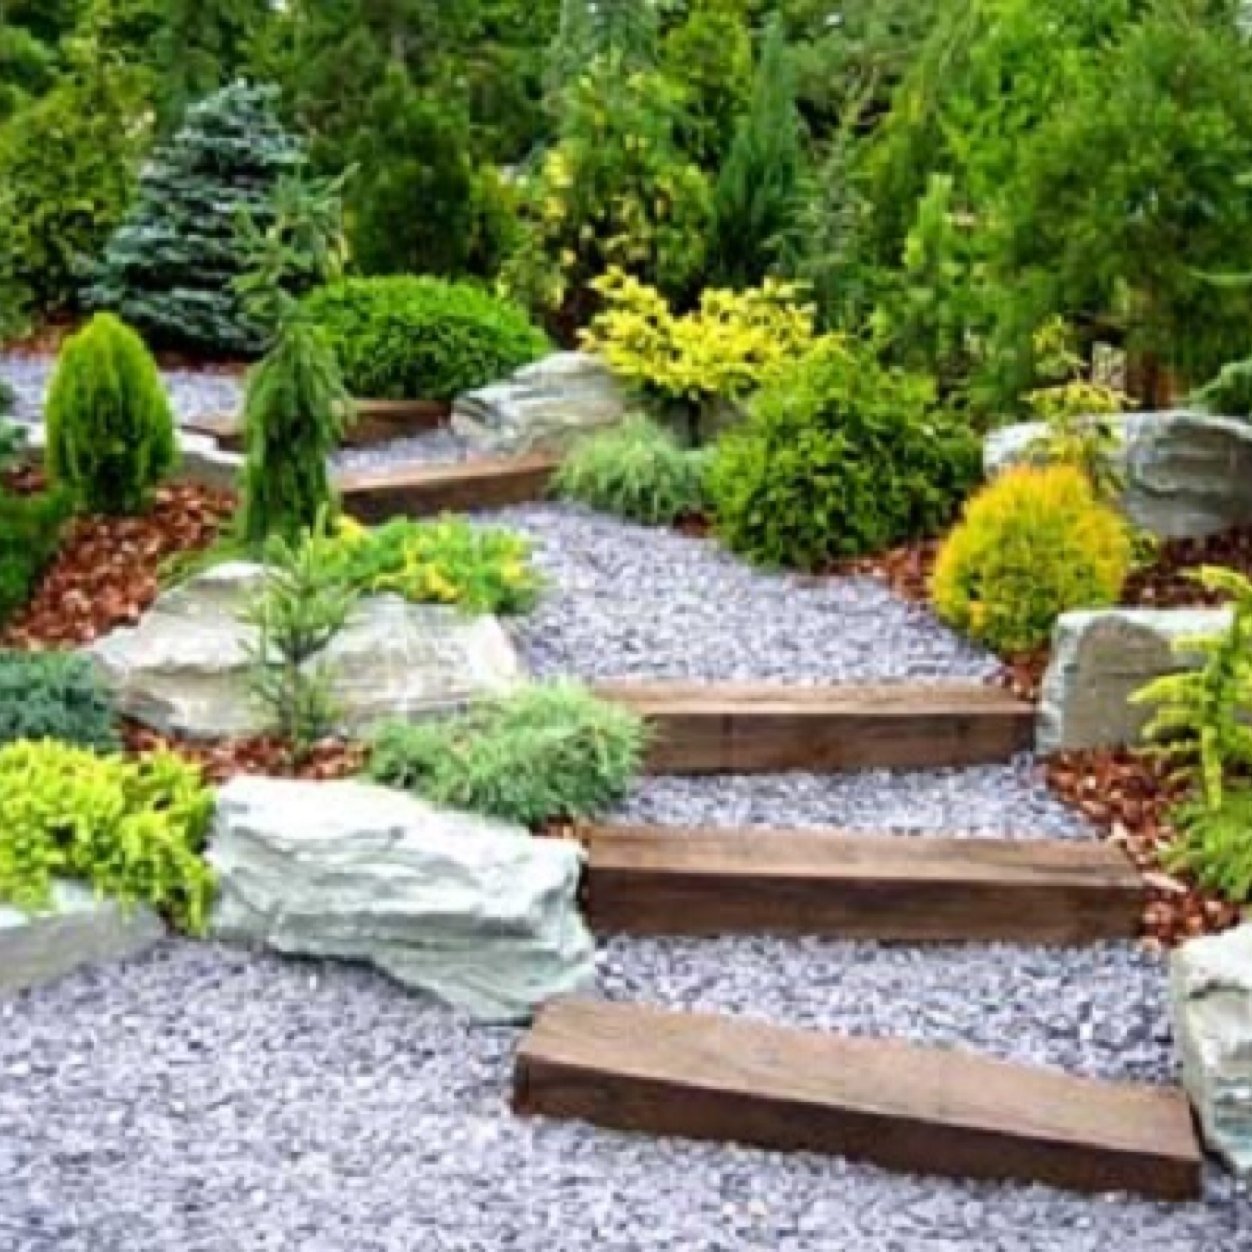 Our aim is to help you create your perfect home garden. We tweet all kinds of amazing deals and offers. Make sure you follow us and dont miss out.